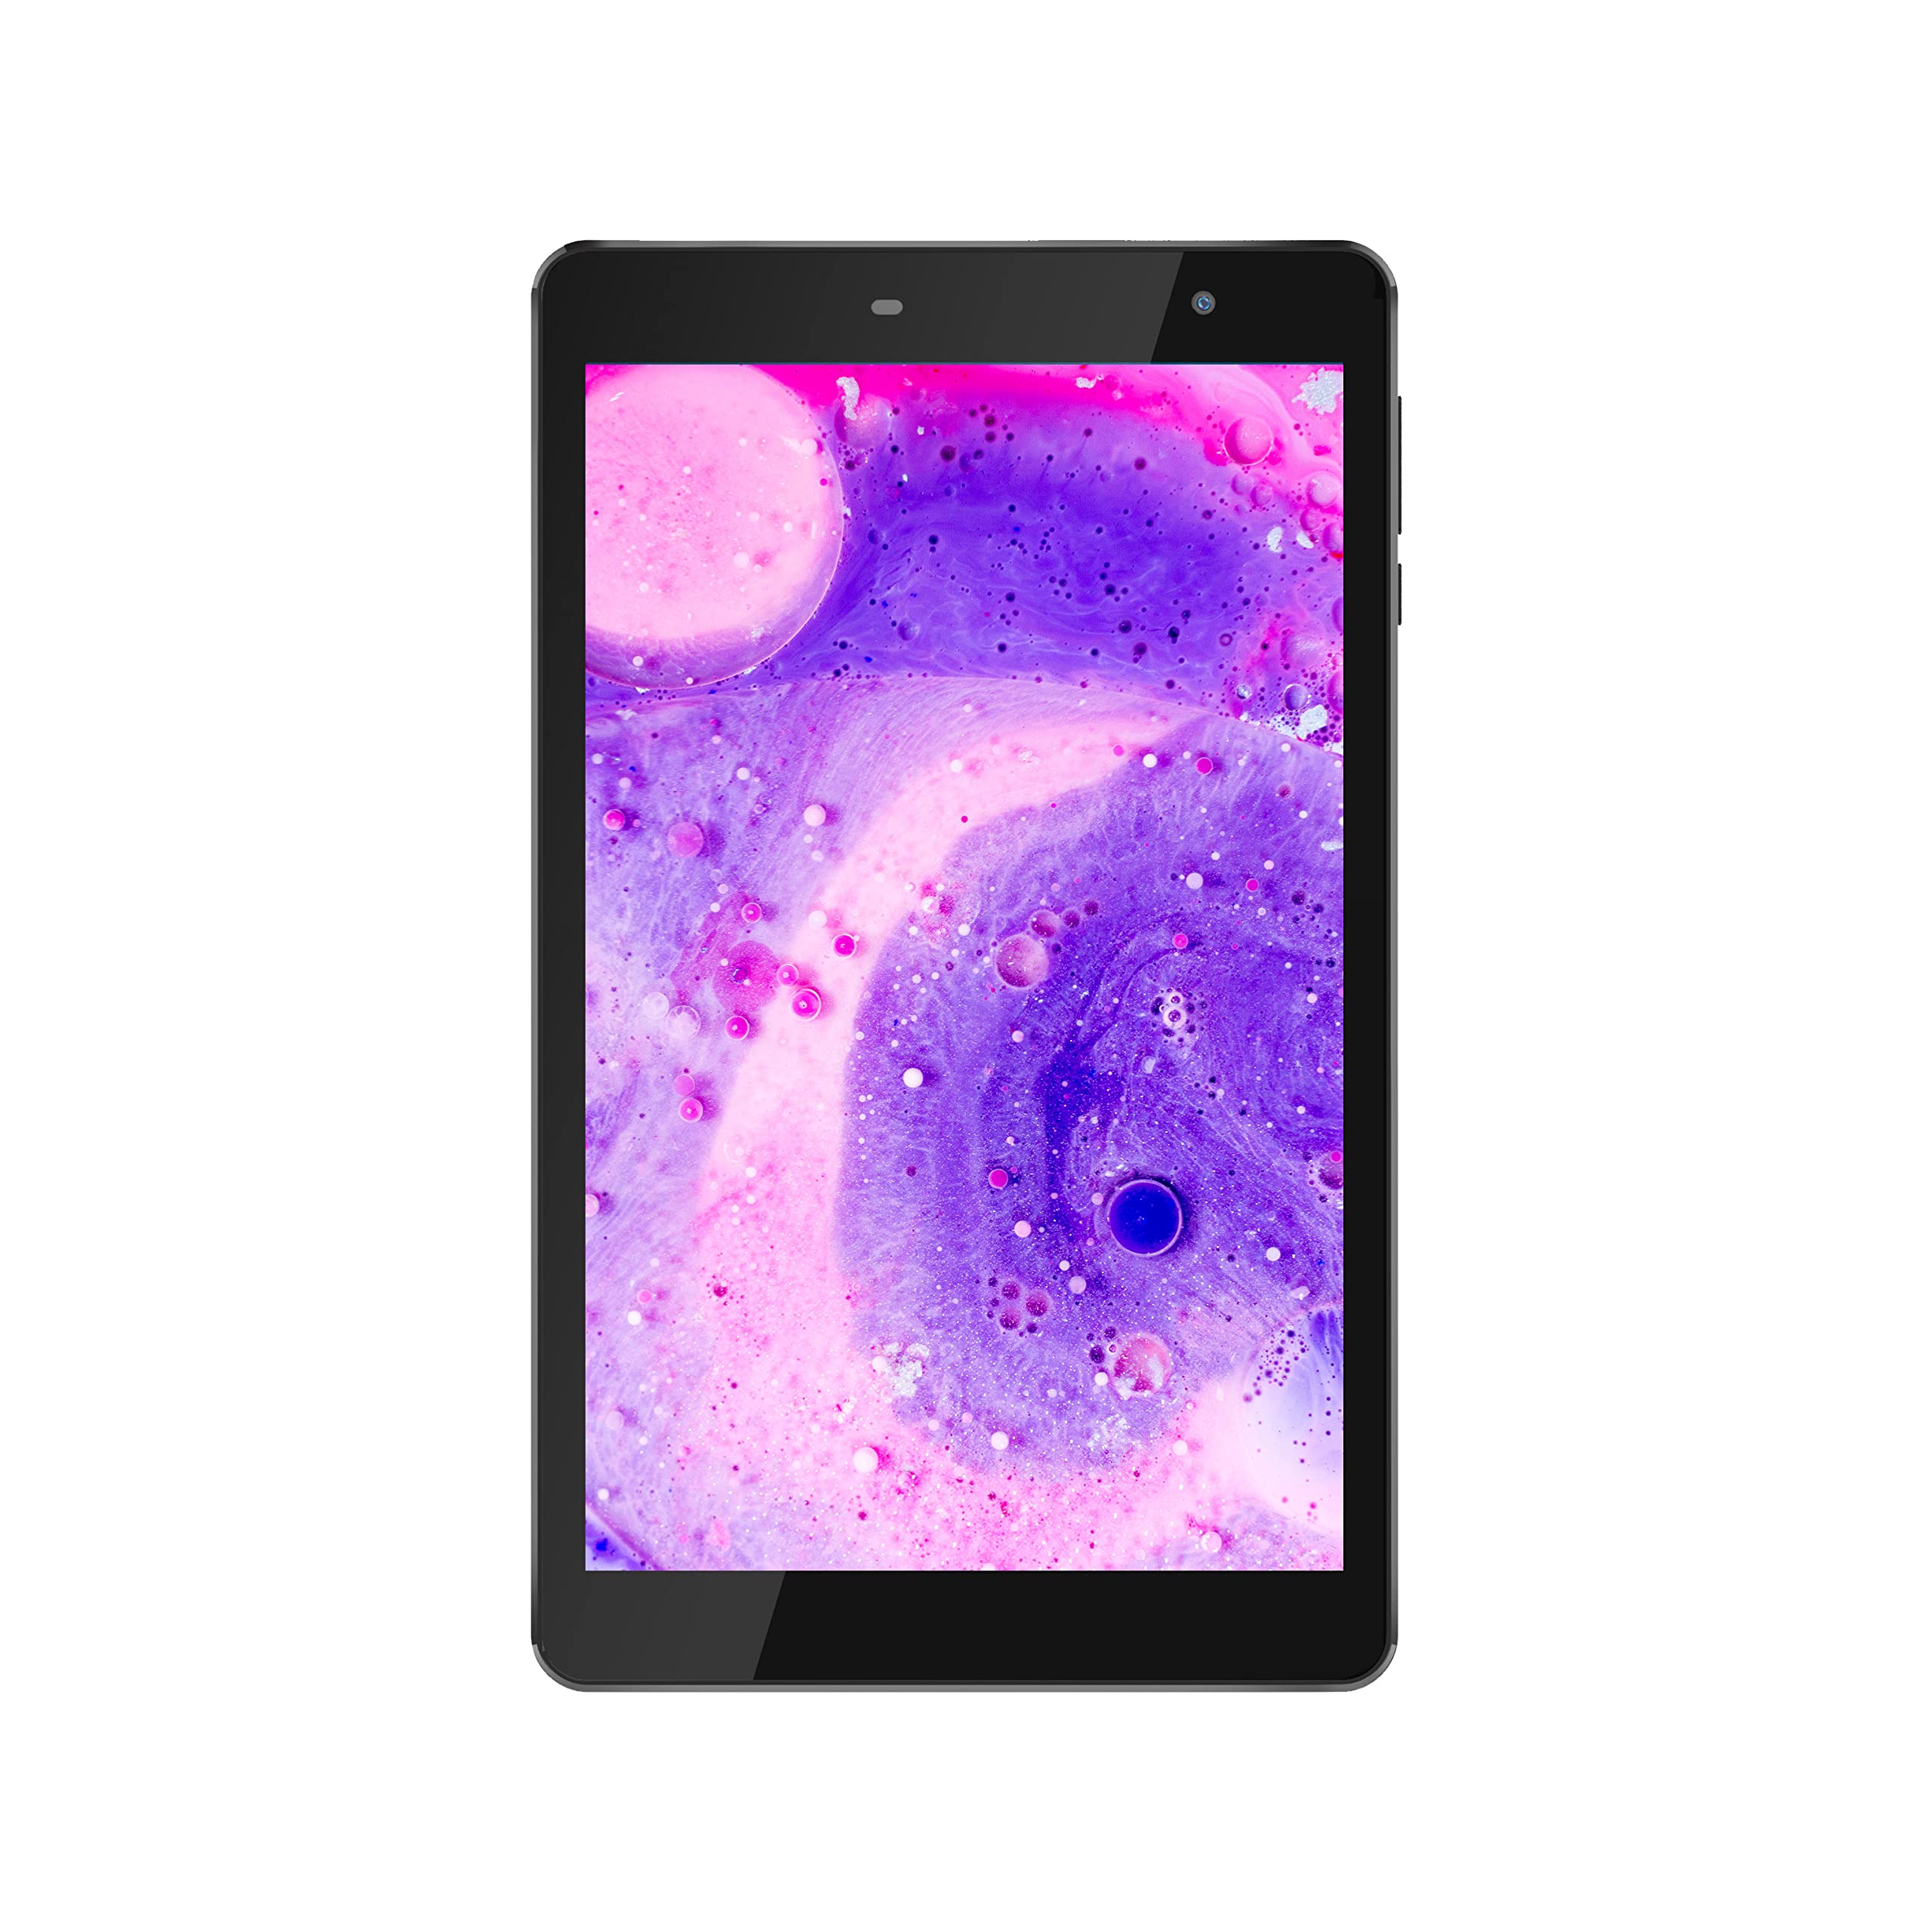 HYUNDAI HYtab Pro 8WB1 8 inch Android Tablet - Full HD Screen with Quad-Core Processor, 3GB RAM 32GB Storage, Android 11, 2MP/5MP, AX WiFi, Bluetooth, Black